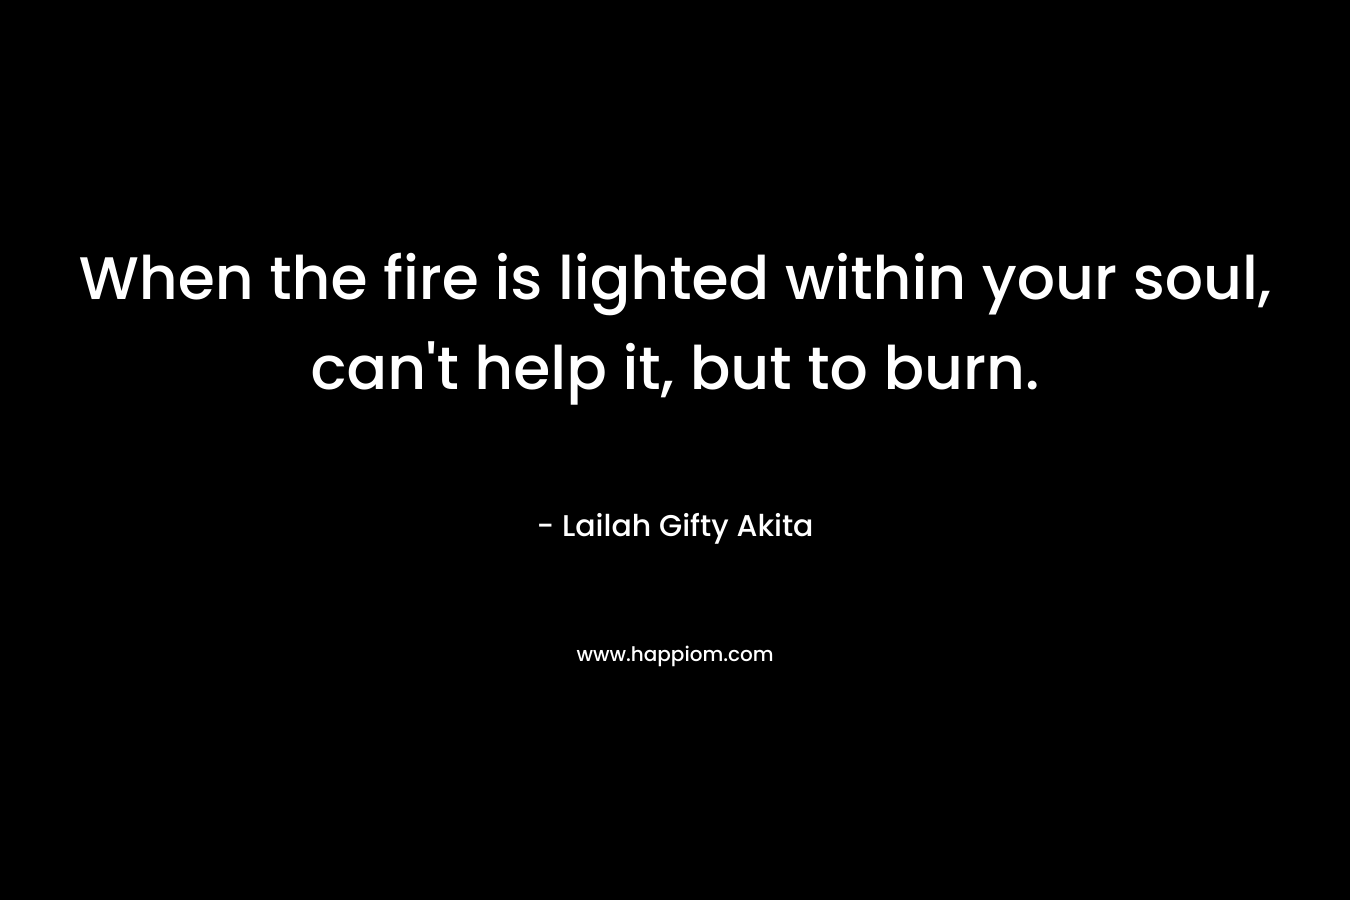 When the fire is lighted within your soul, can’t help it, but to burn. – Lailah Gifty Akita